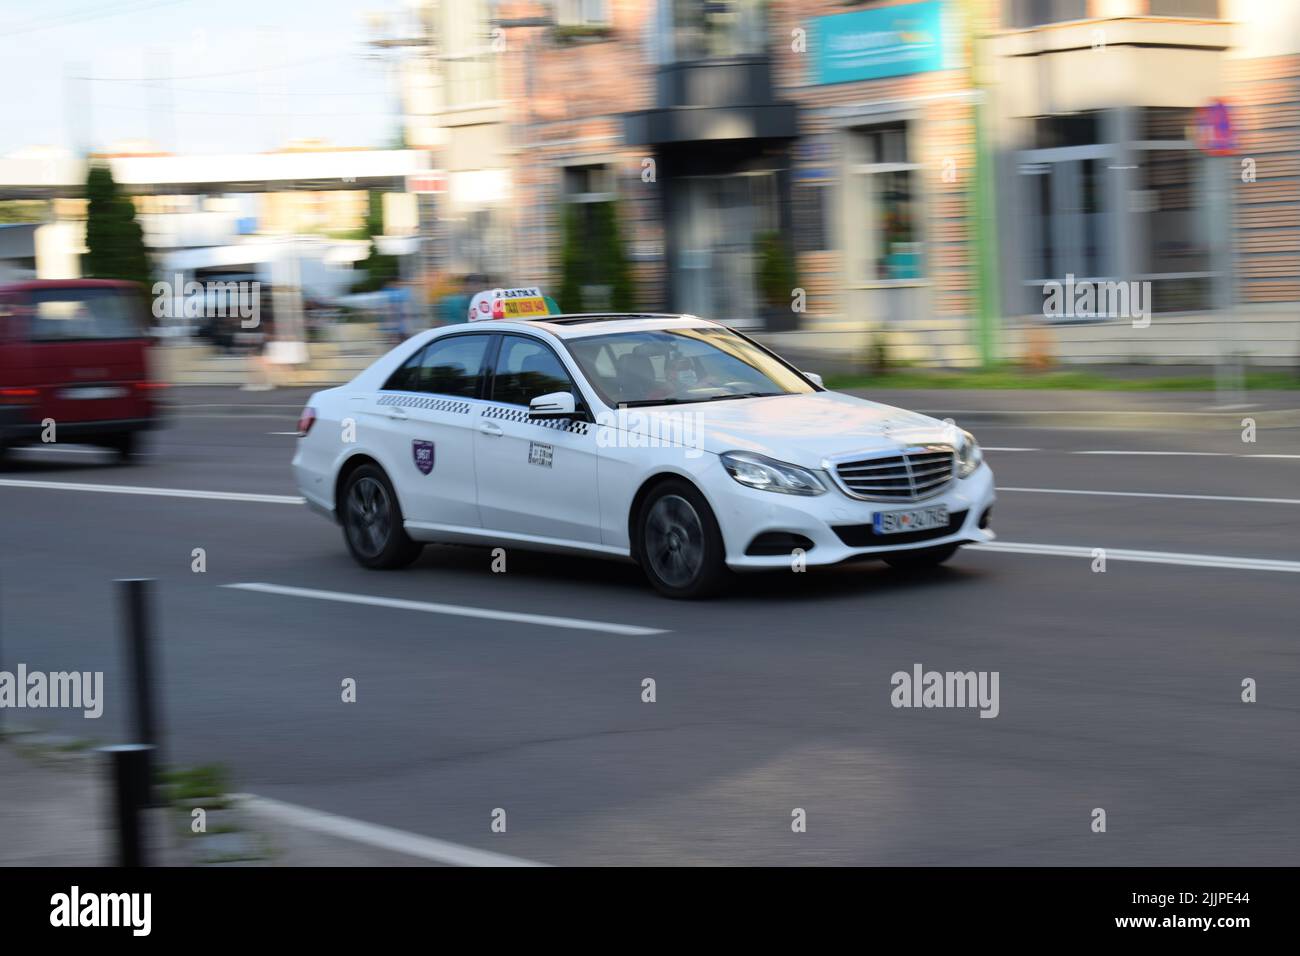 A white Mercedes-Benz taxi car on the street in Brasov, Romania, in summer Stock Photo